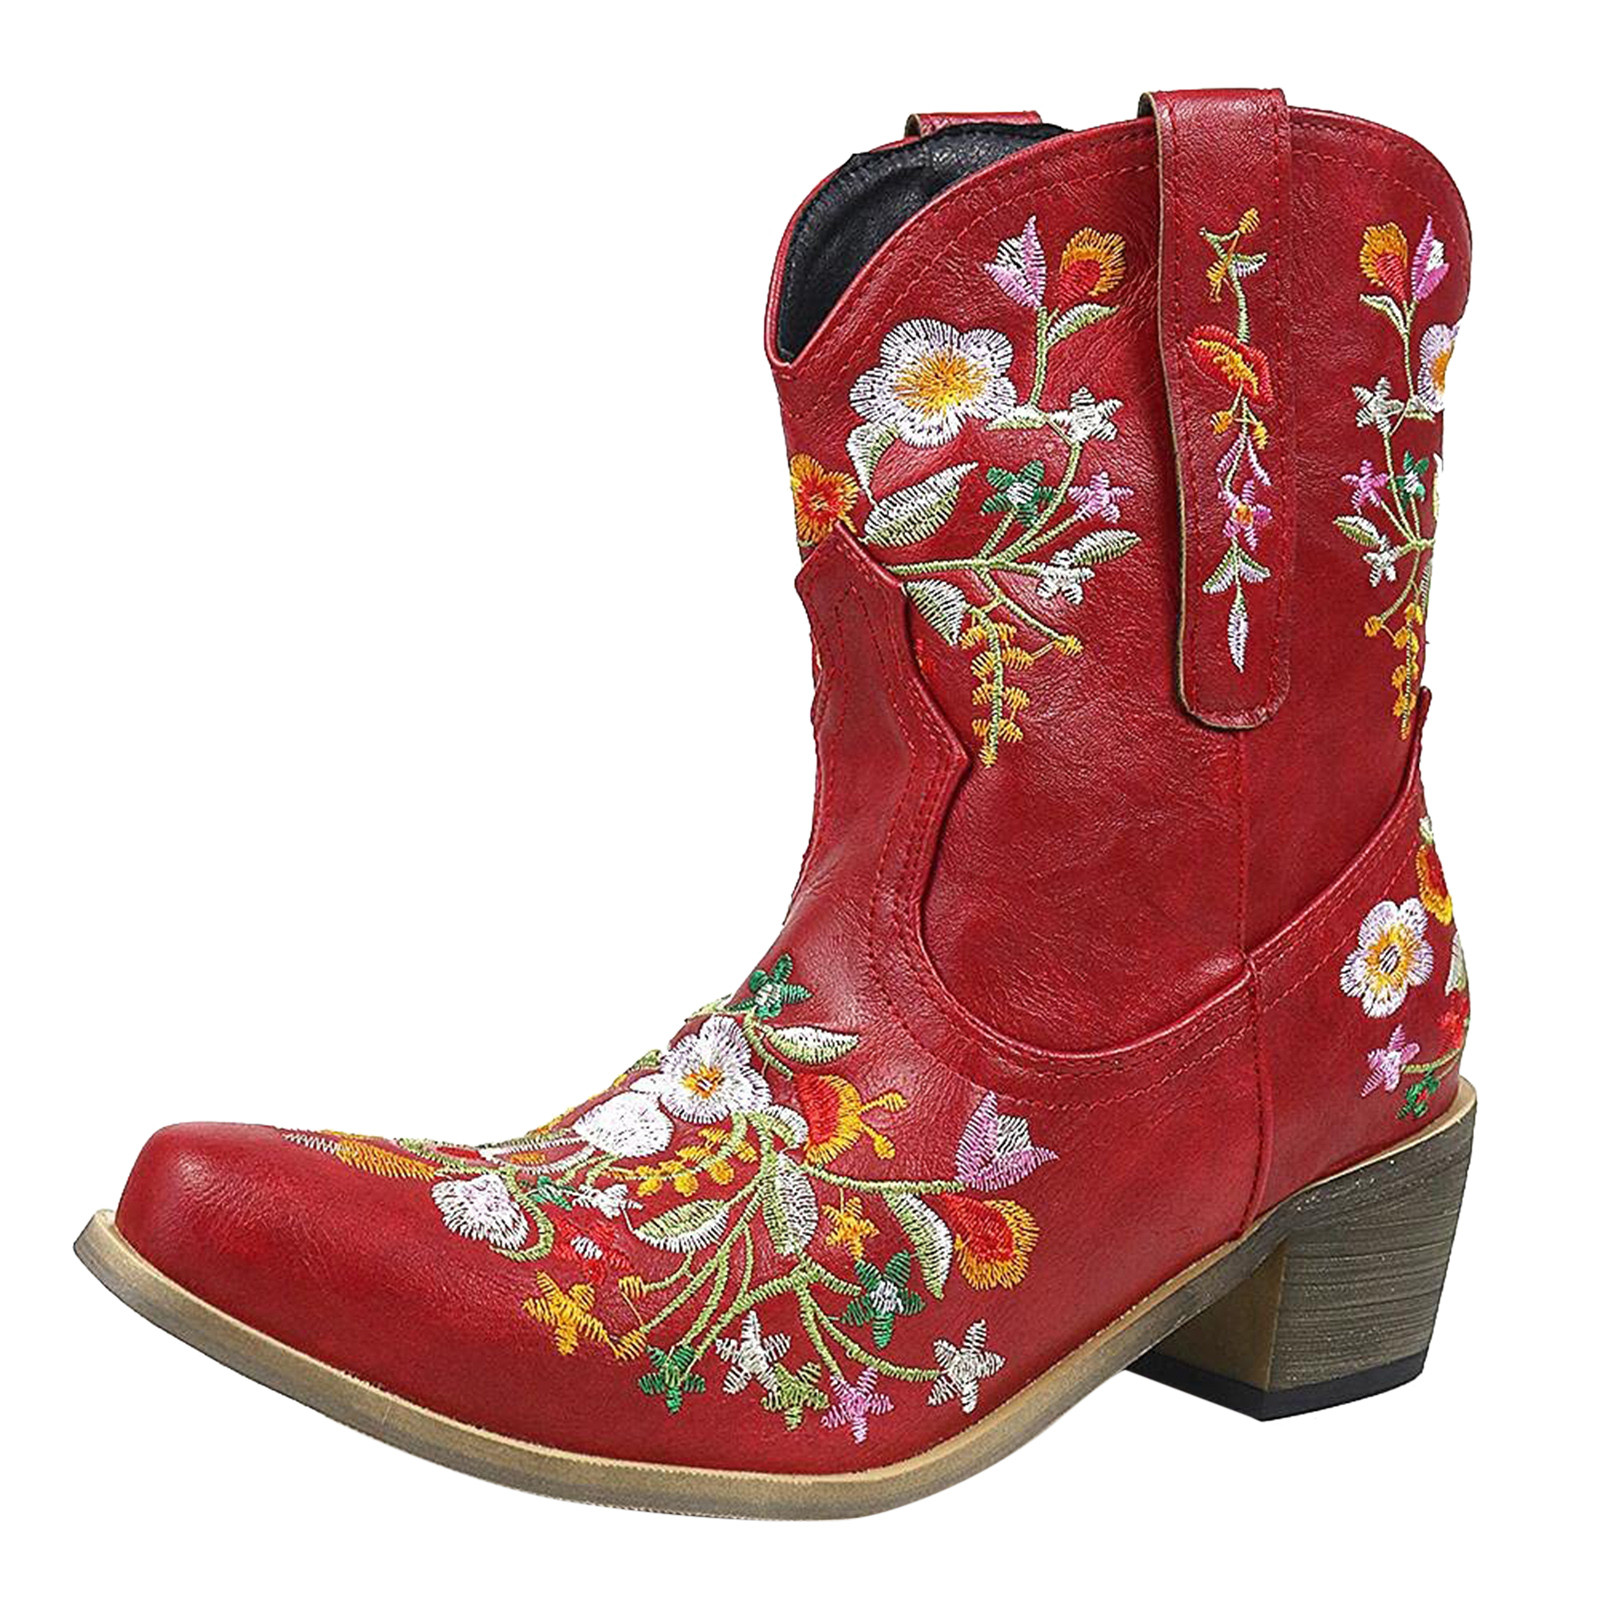 Cowboy Boots For Women Cowgirls Boots Embroidered Retro Shoes Ankle ...